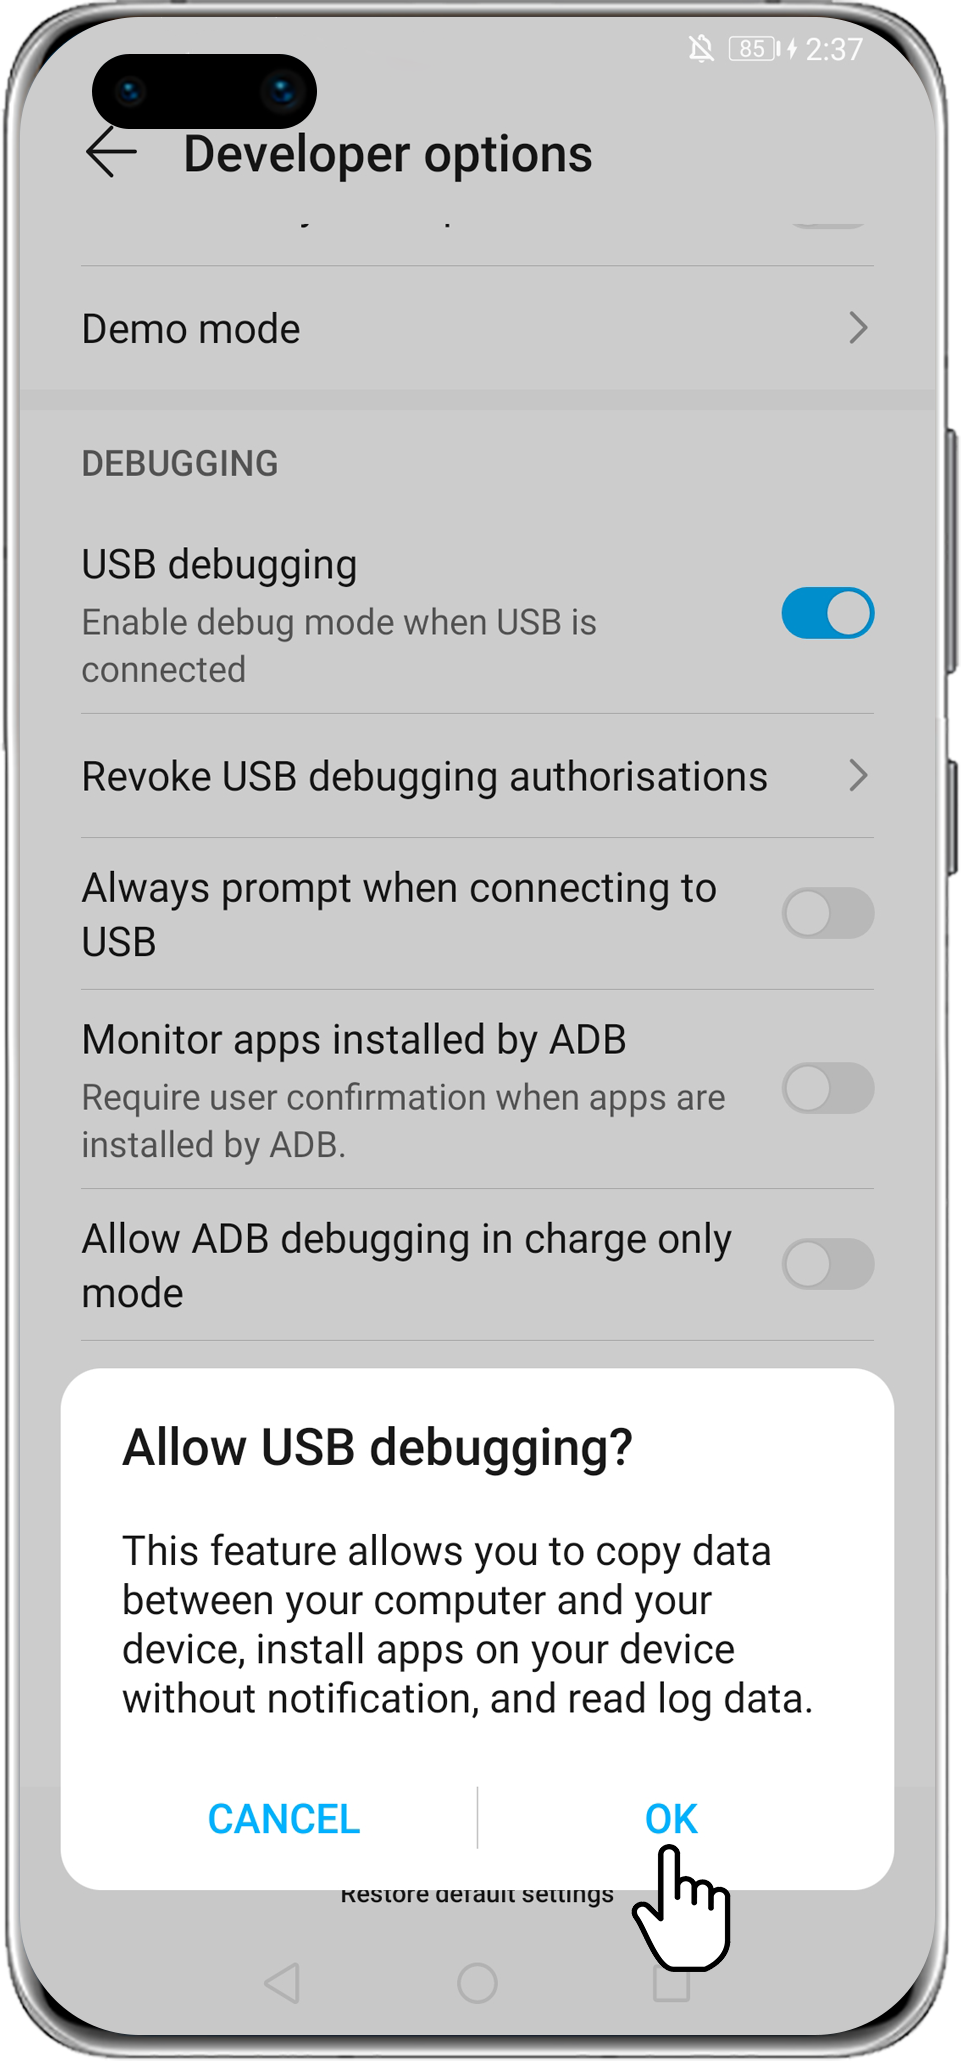 Unable to USB debugging my HUAWEI phone is connected to a computer using USB cable | HUAWEI Support Global